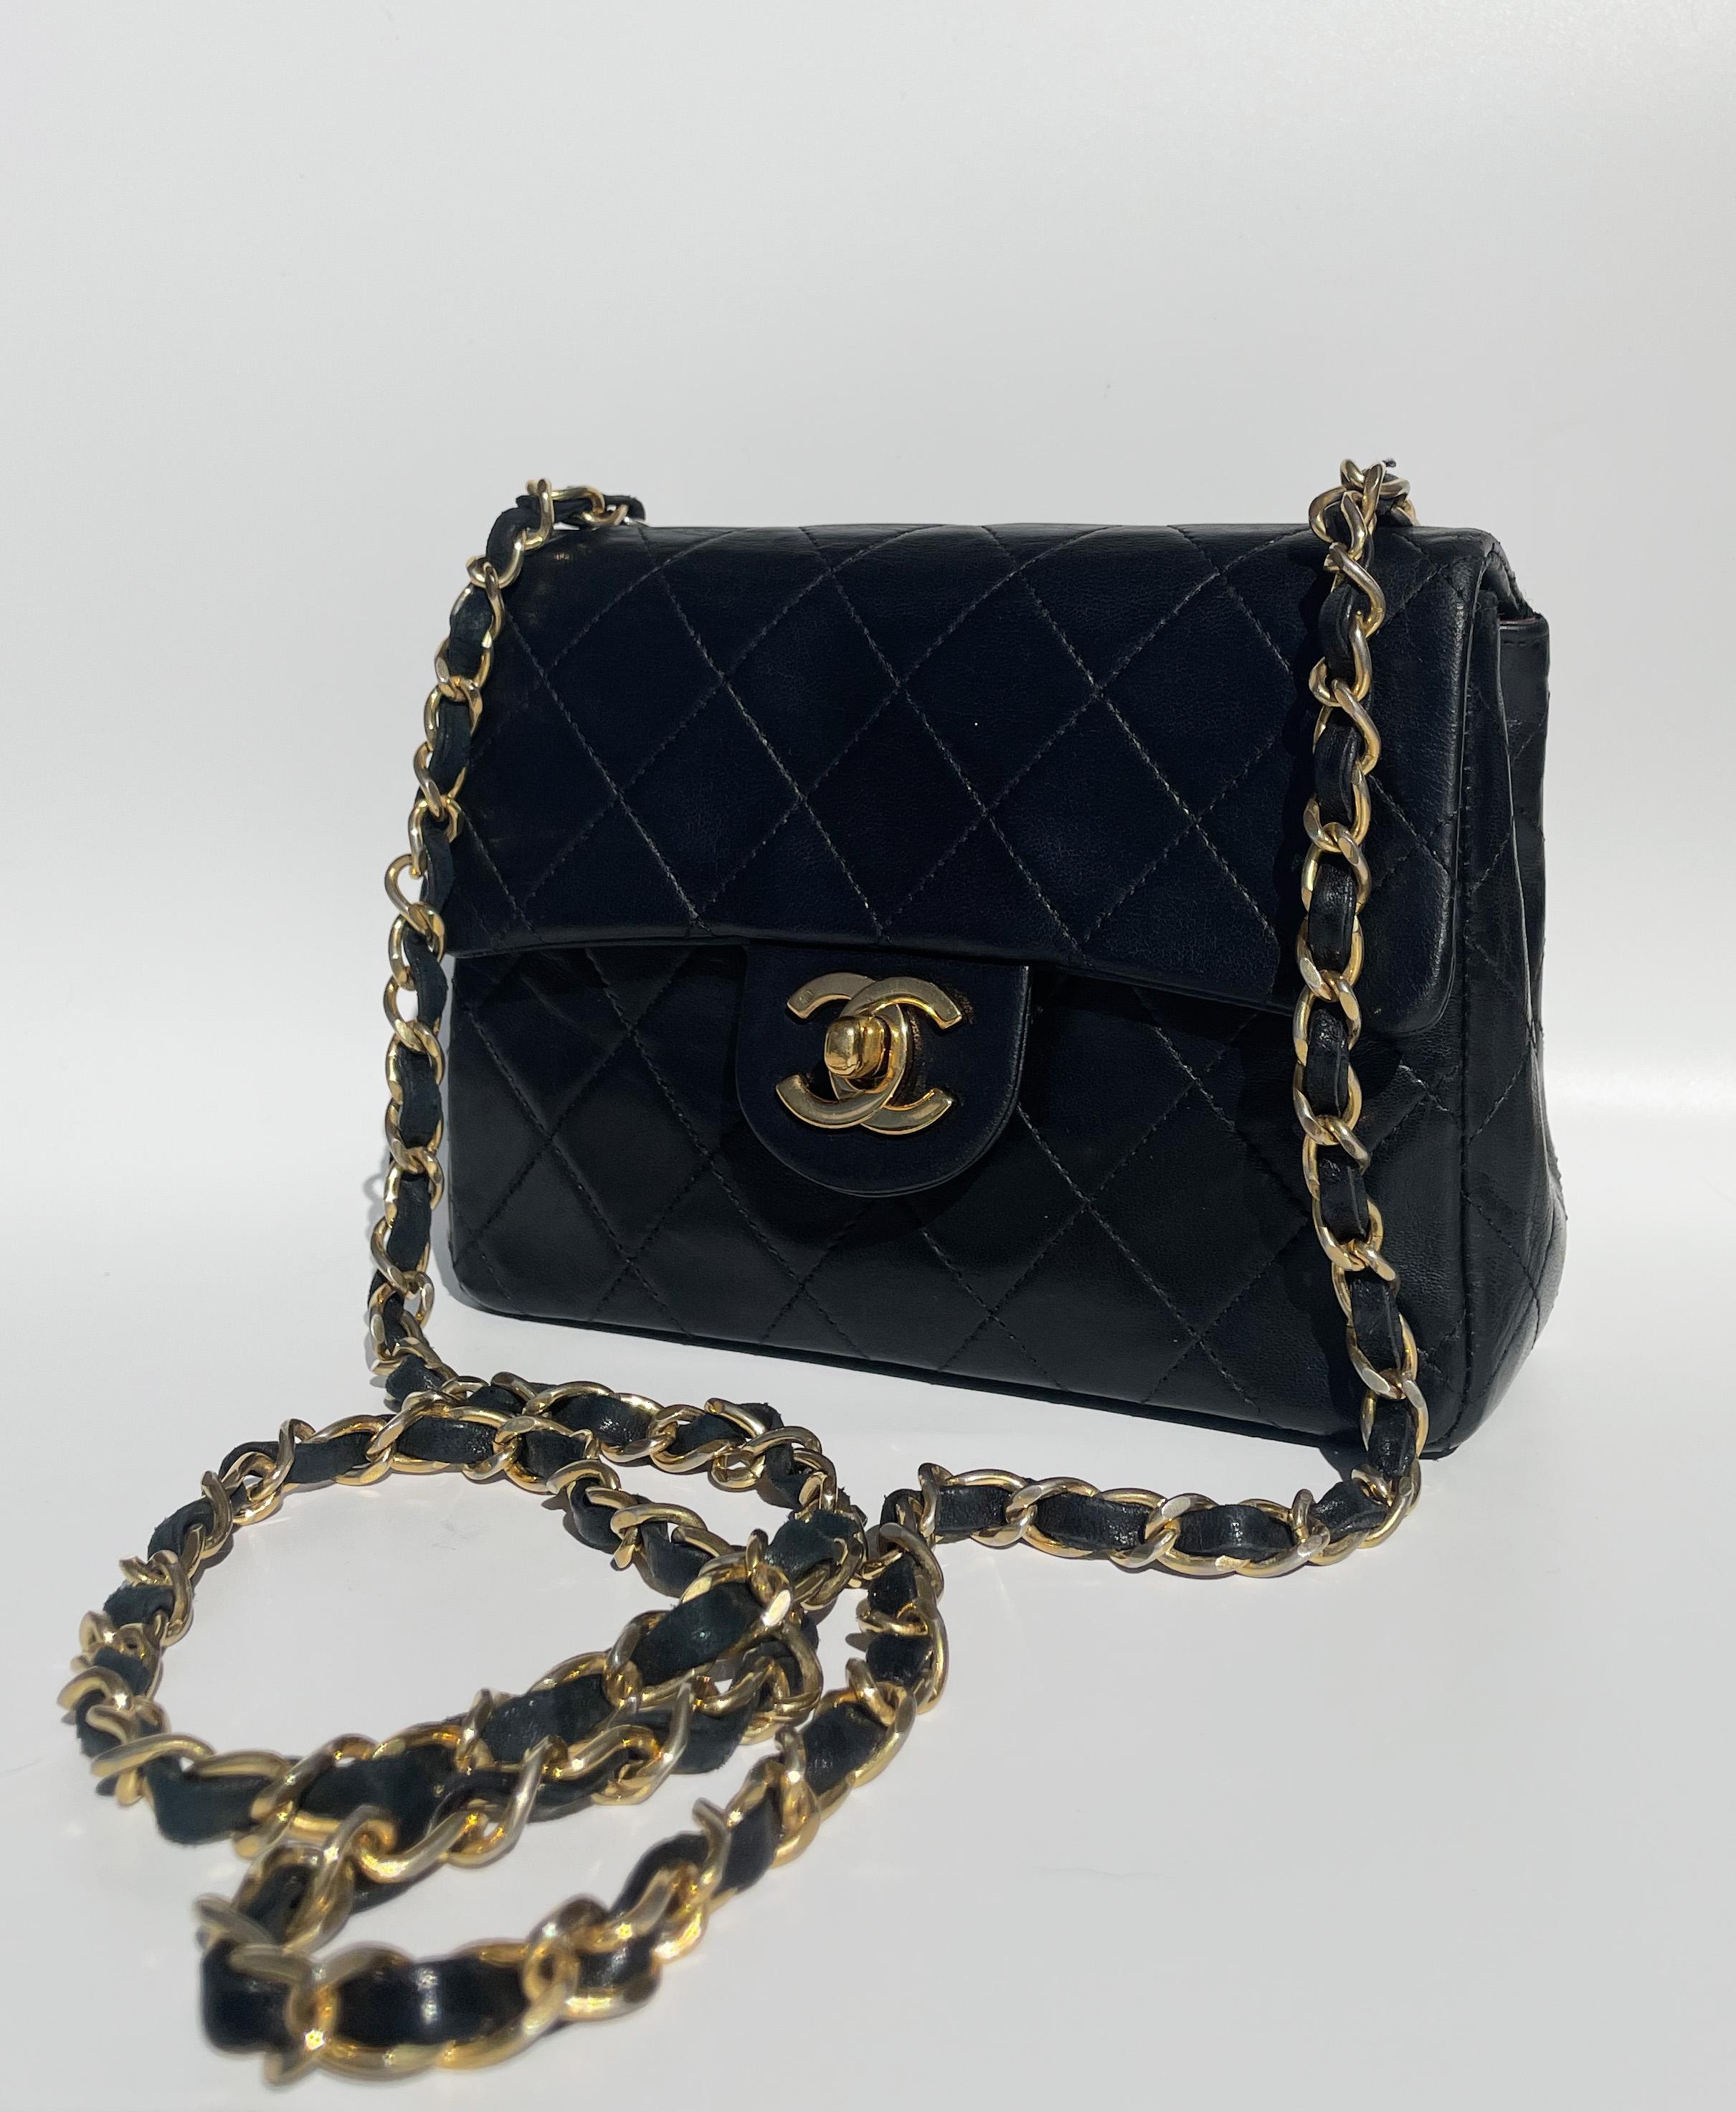 Classic Chanel Mini Timeless handbag in black quilted leather For Sale 2